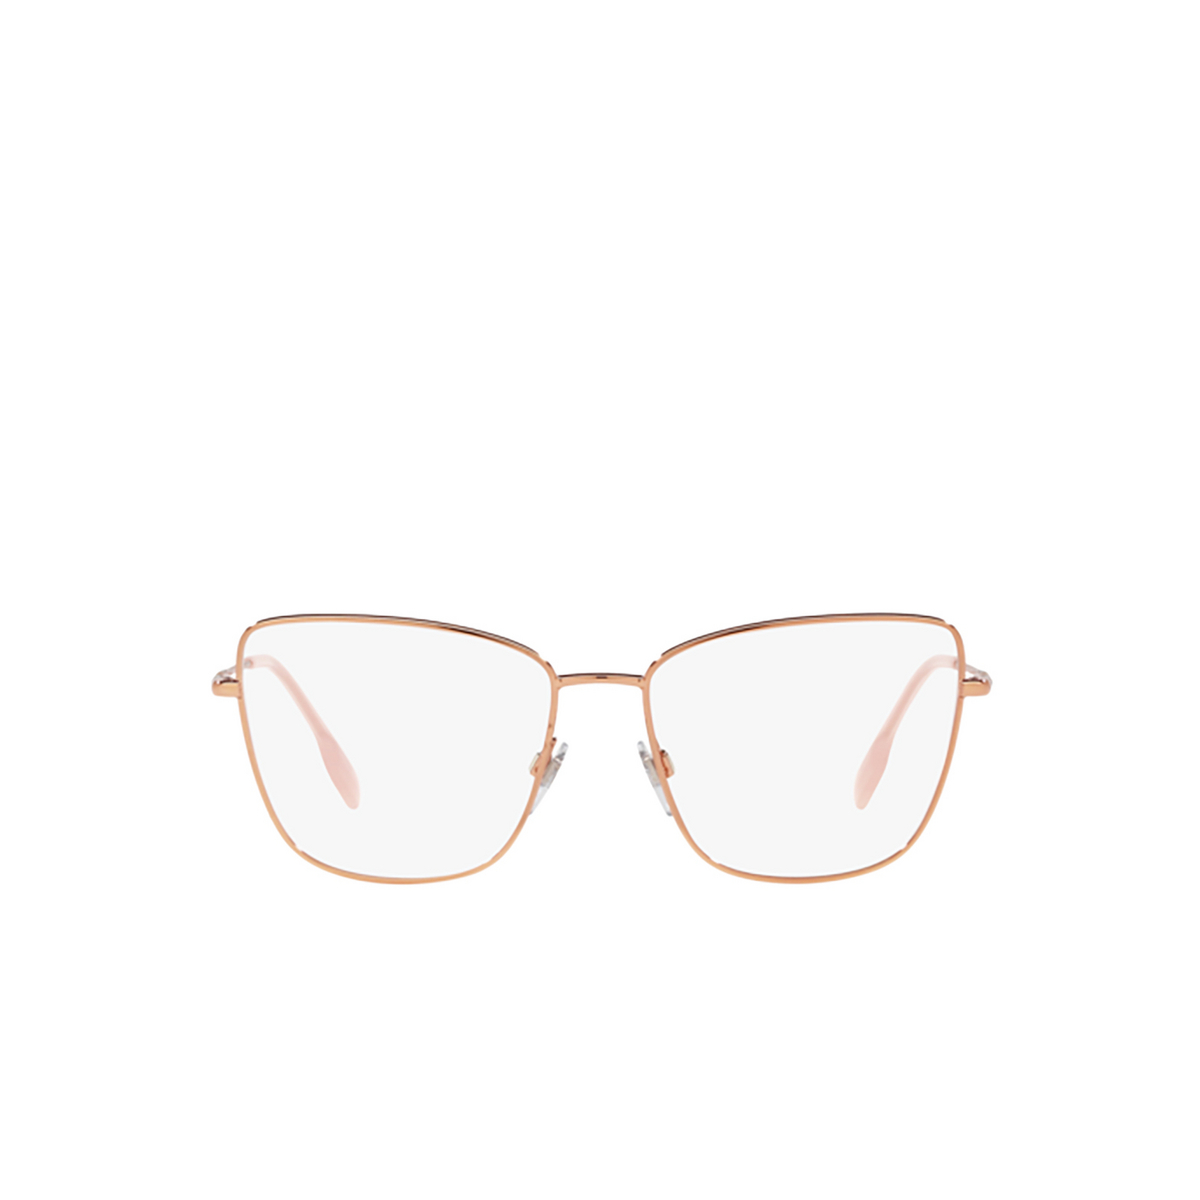 Burberry BEA Eyeglasses 1337 Rose Gold - front view